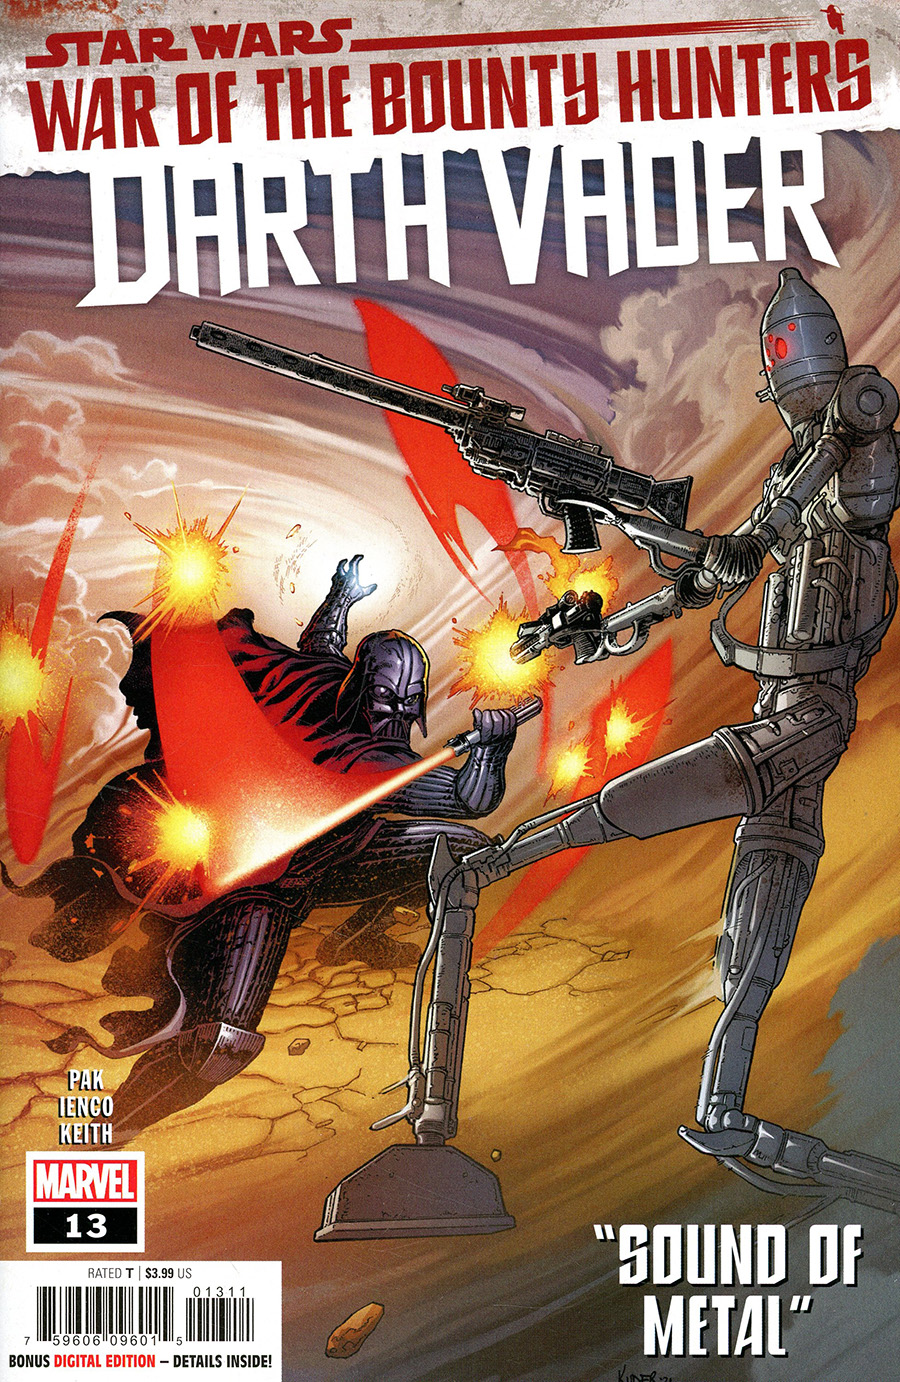 Star Wars Darth Vader #13 Cover A Regular Aaron Kuder Cover (War Of The Bounty Hunters Tie-In)